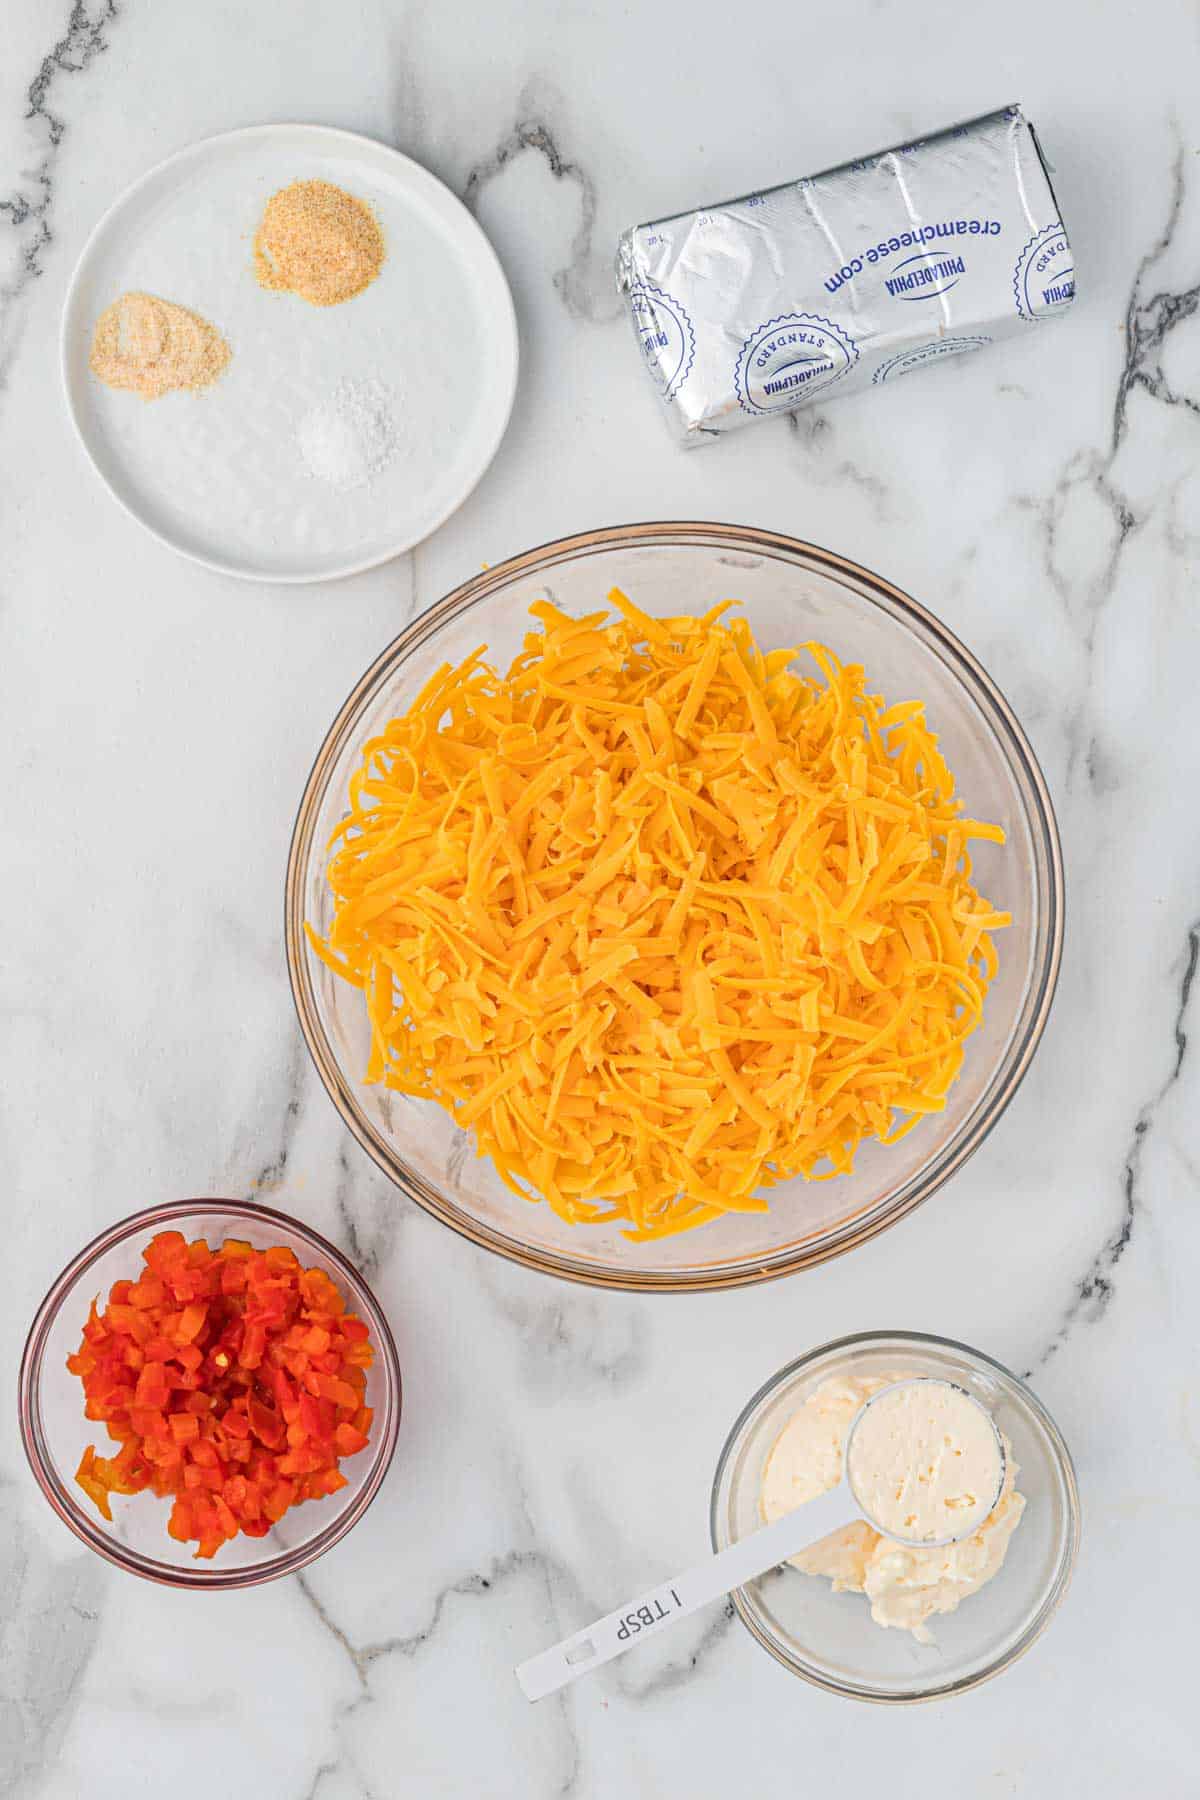 ingredients needed to make pimento cheese